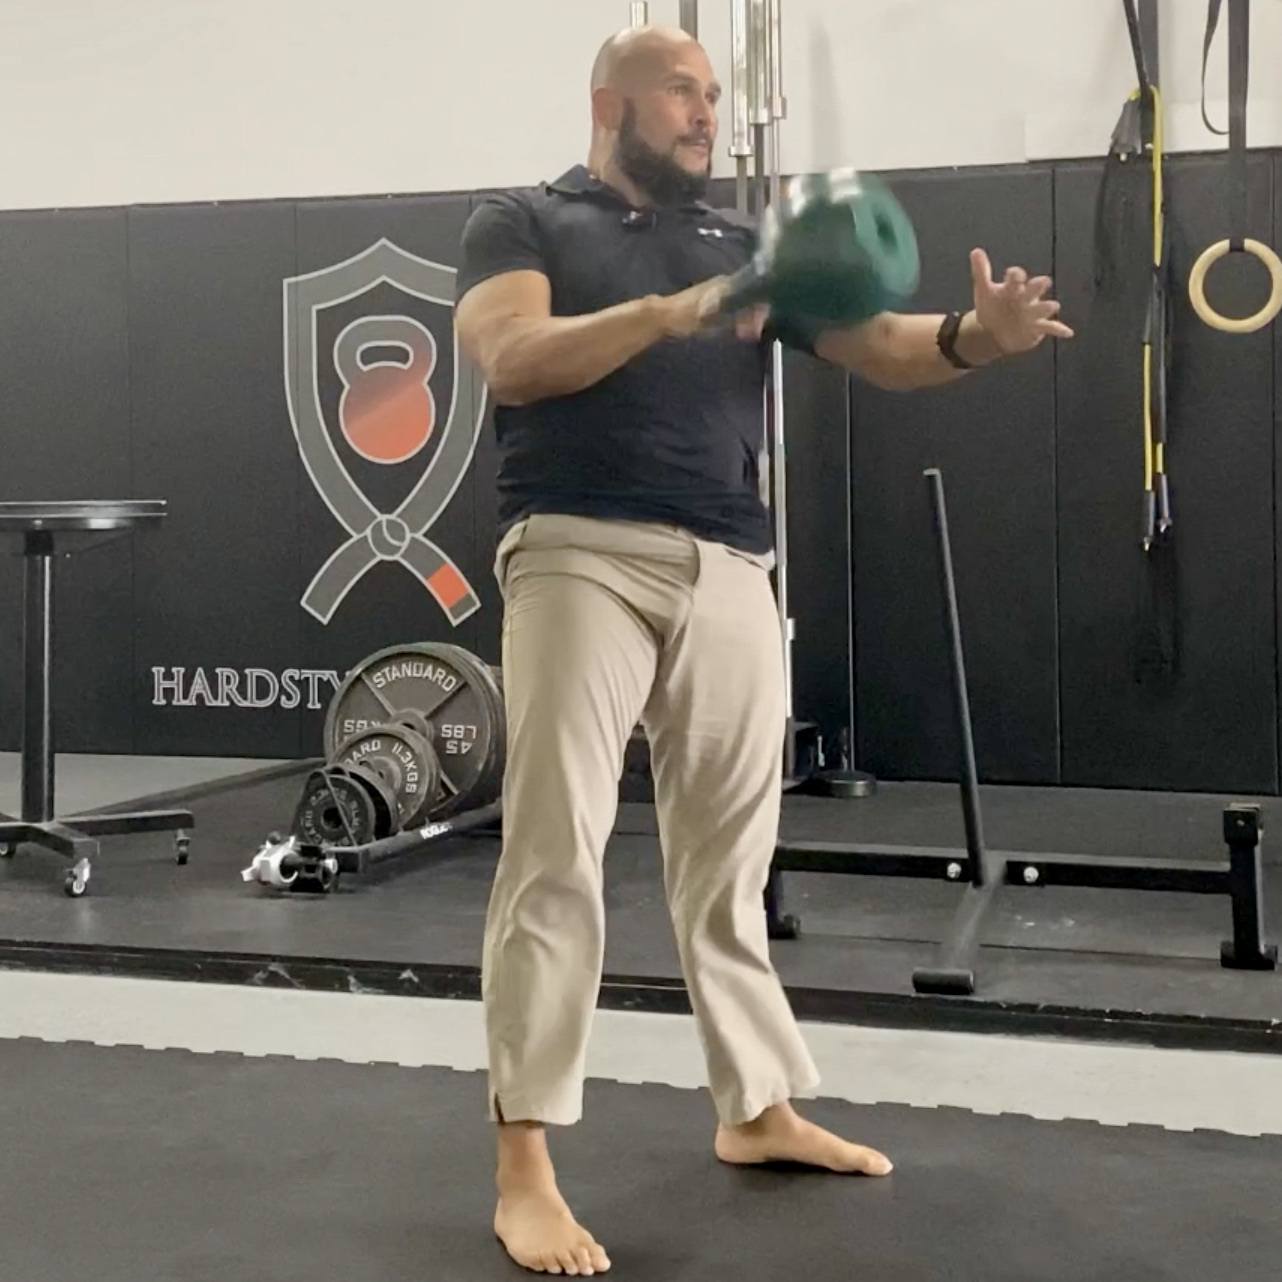 how to improve you're kettlebell snatch, improve your snatch